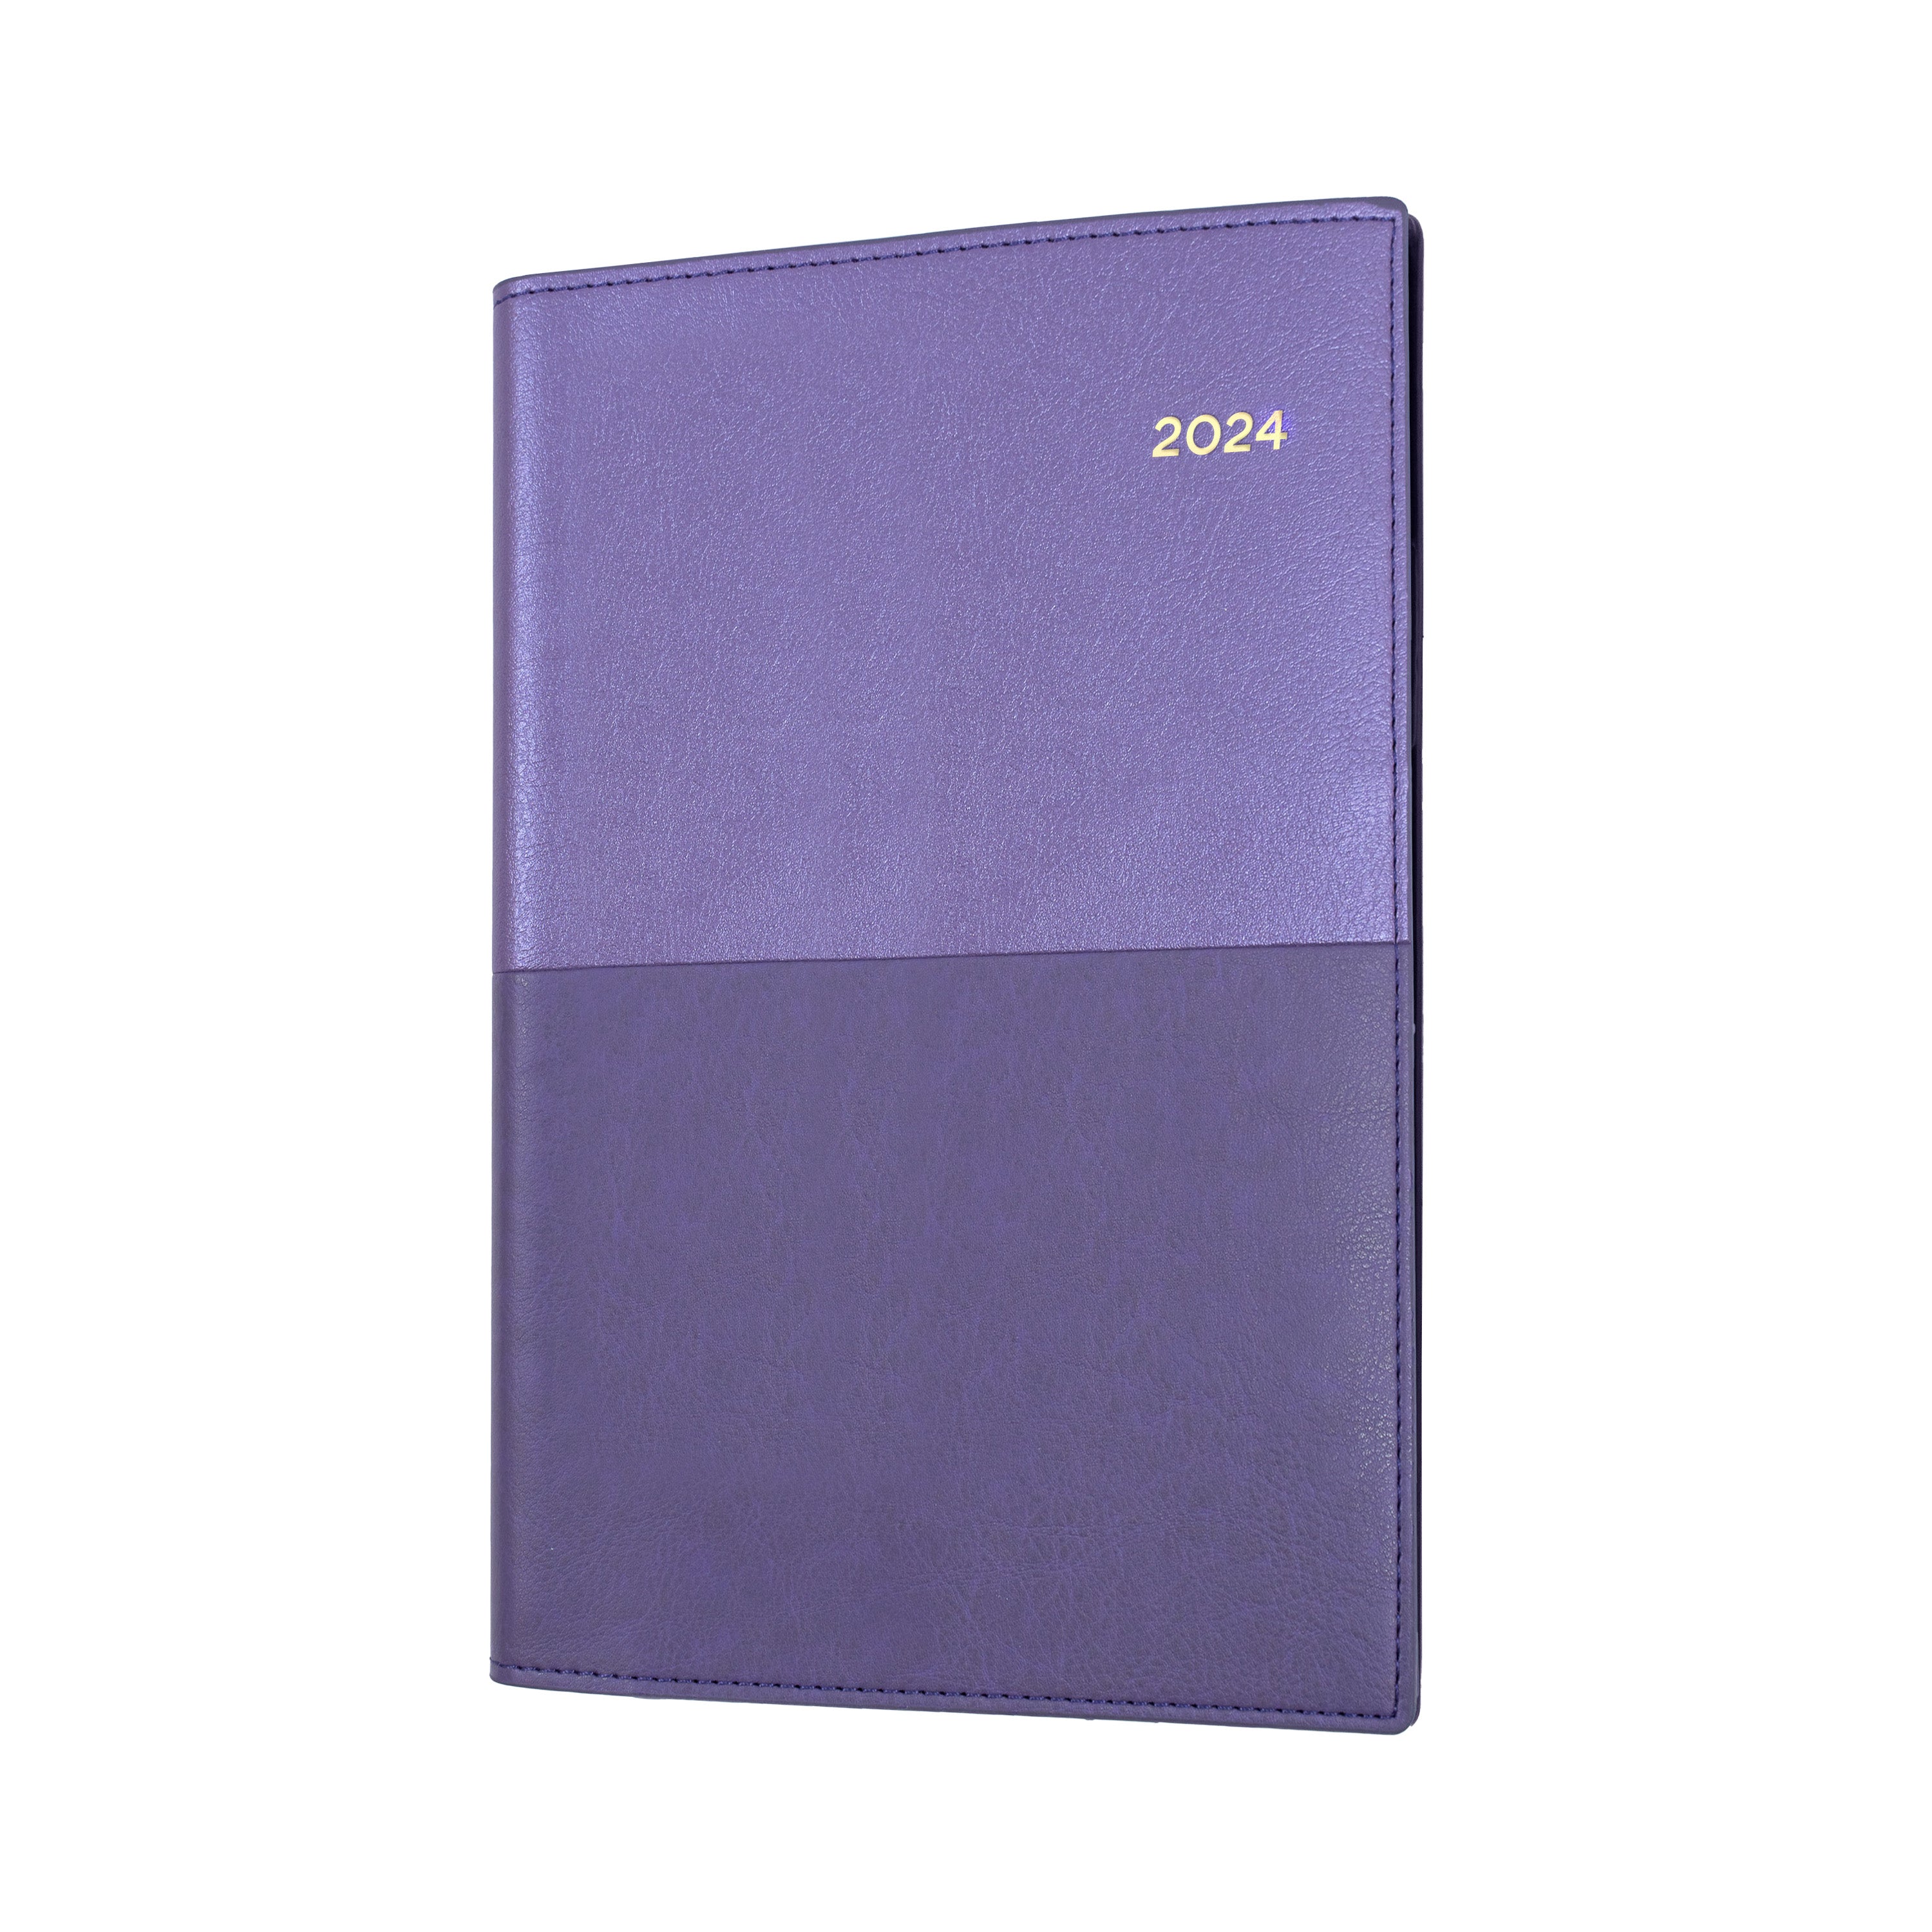 Collins Vanessa 2024 Diary - Month to View